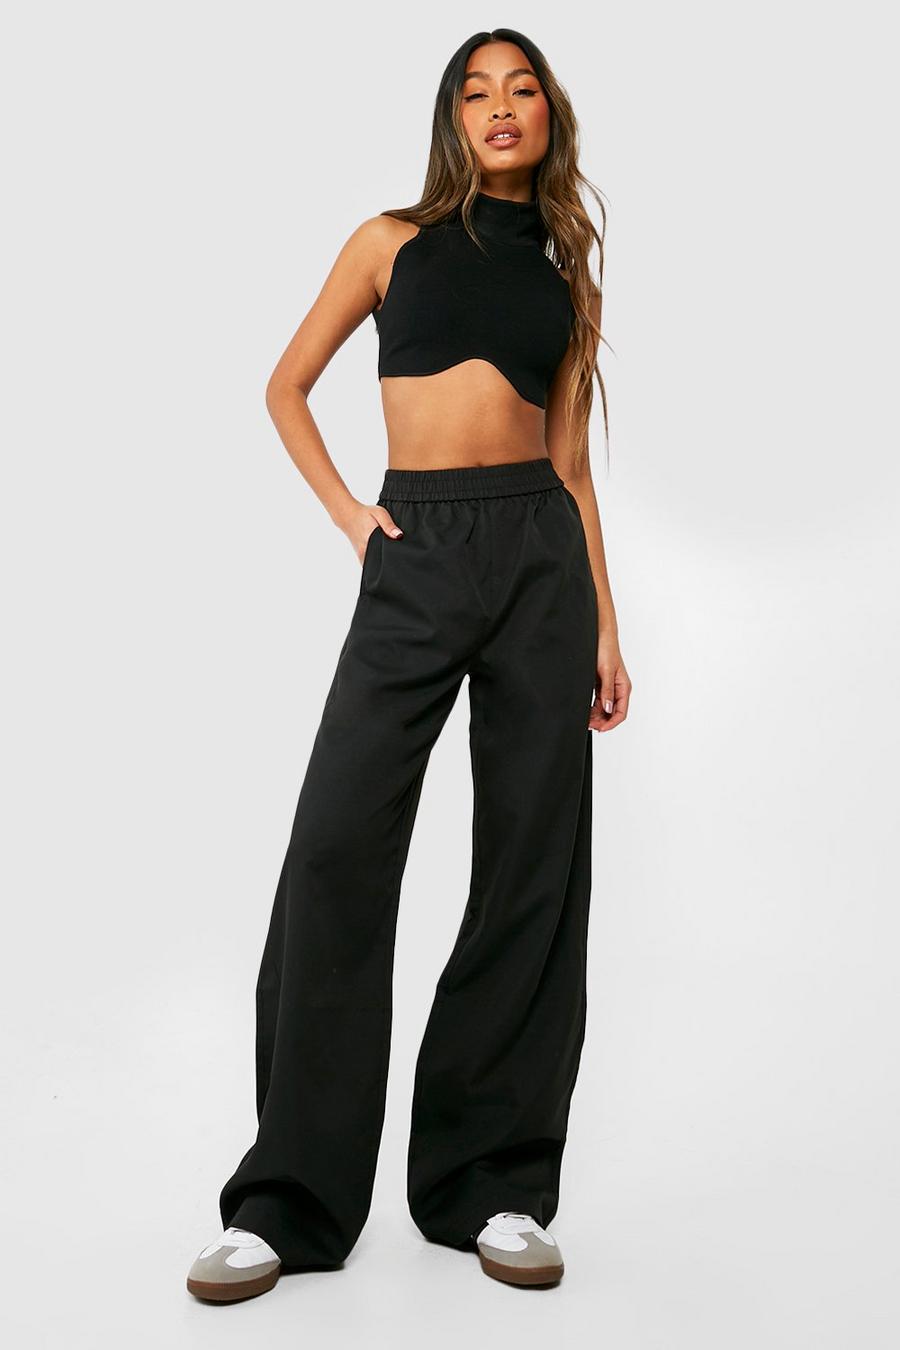 Black Elasticated Waist Relaxed Fit Wide Leg Pants